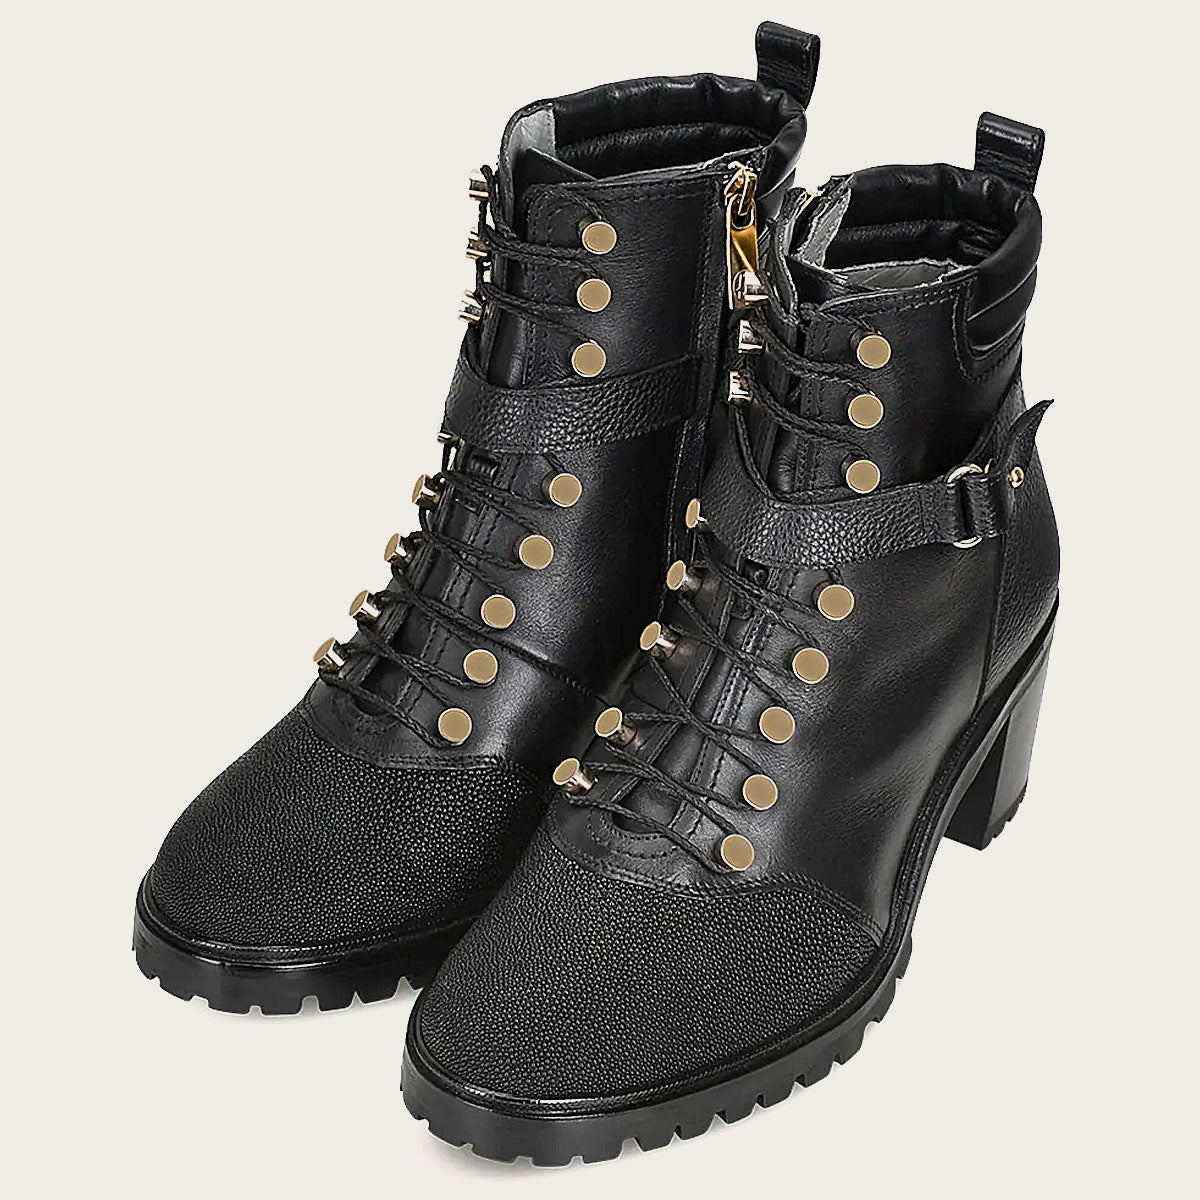 Inca black exotic leather bootie. Elevate your style with these sleek and unique boots. Order now for a bold fashion statement